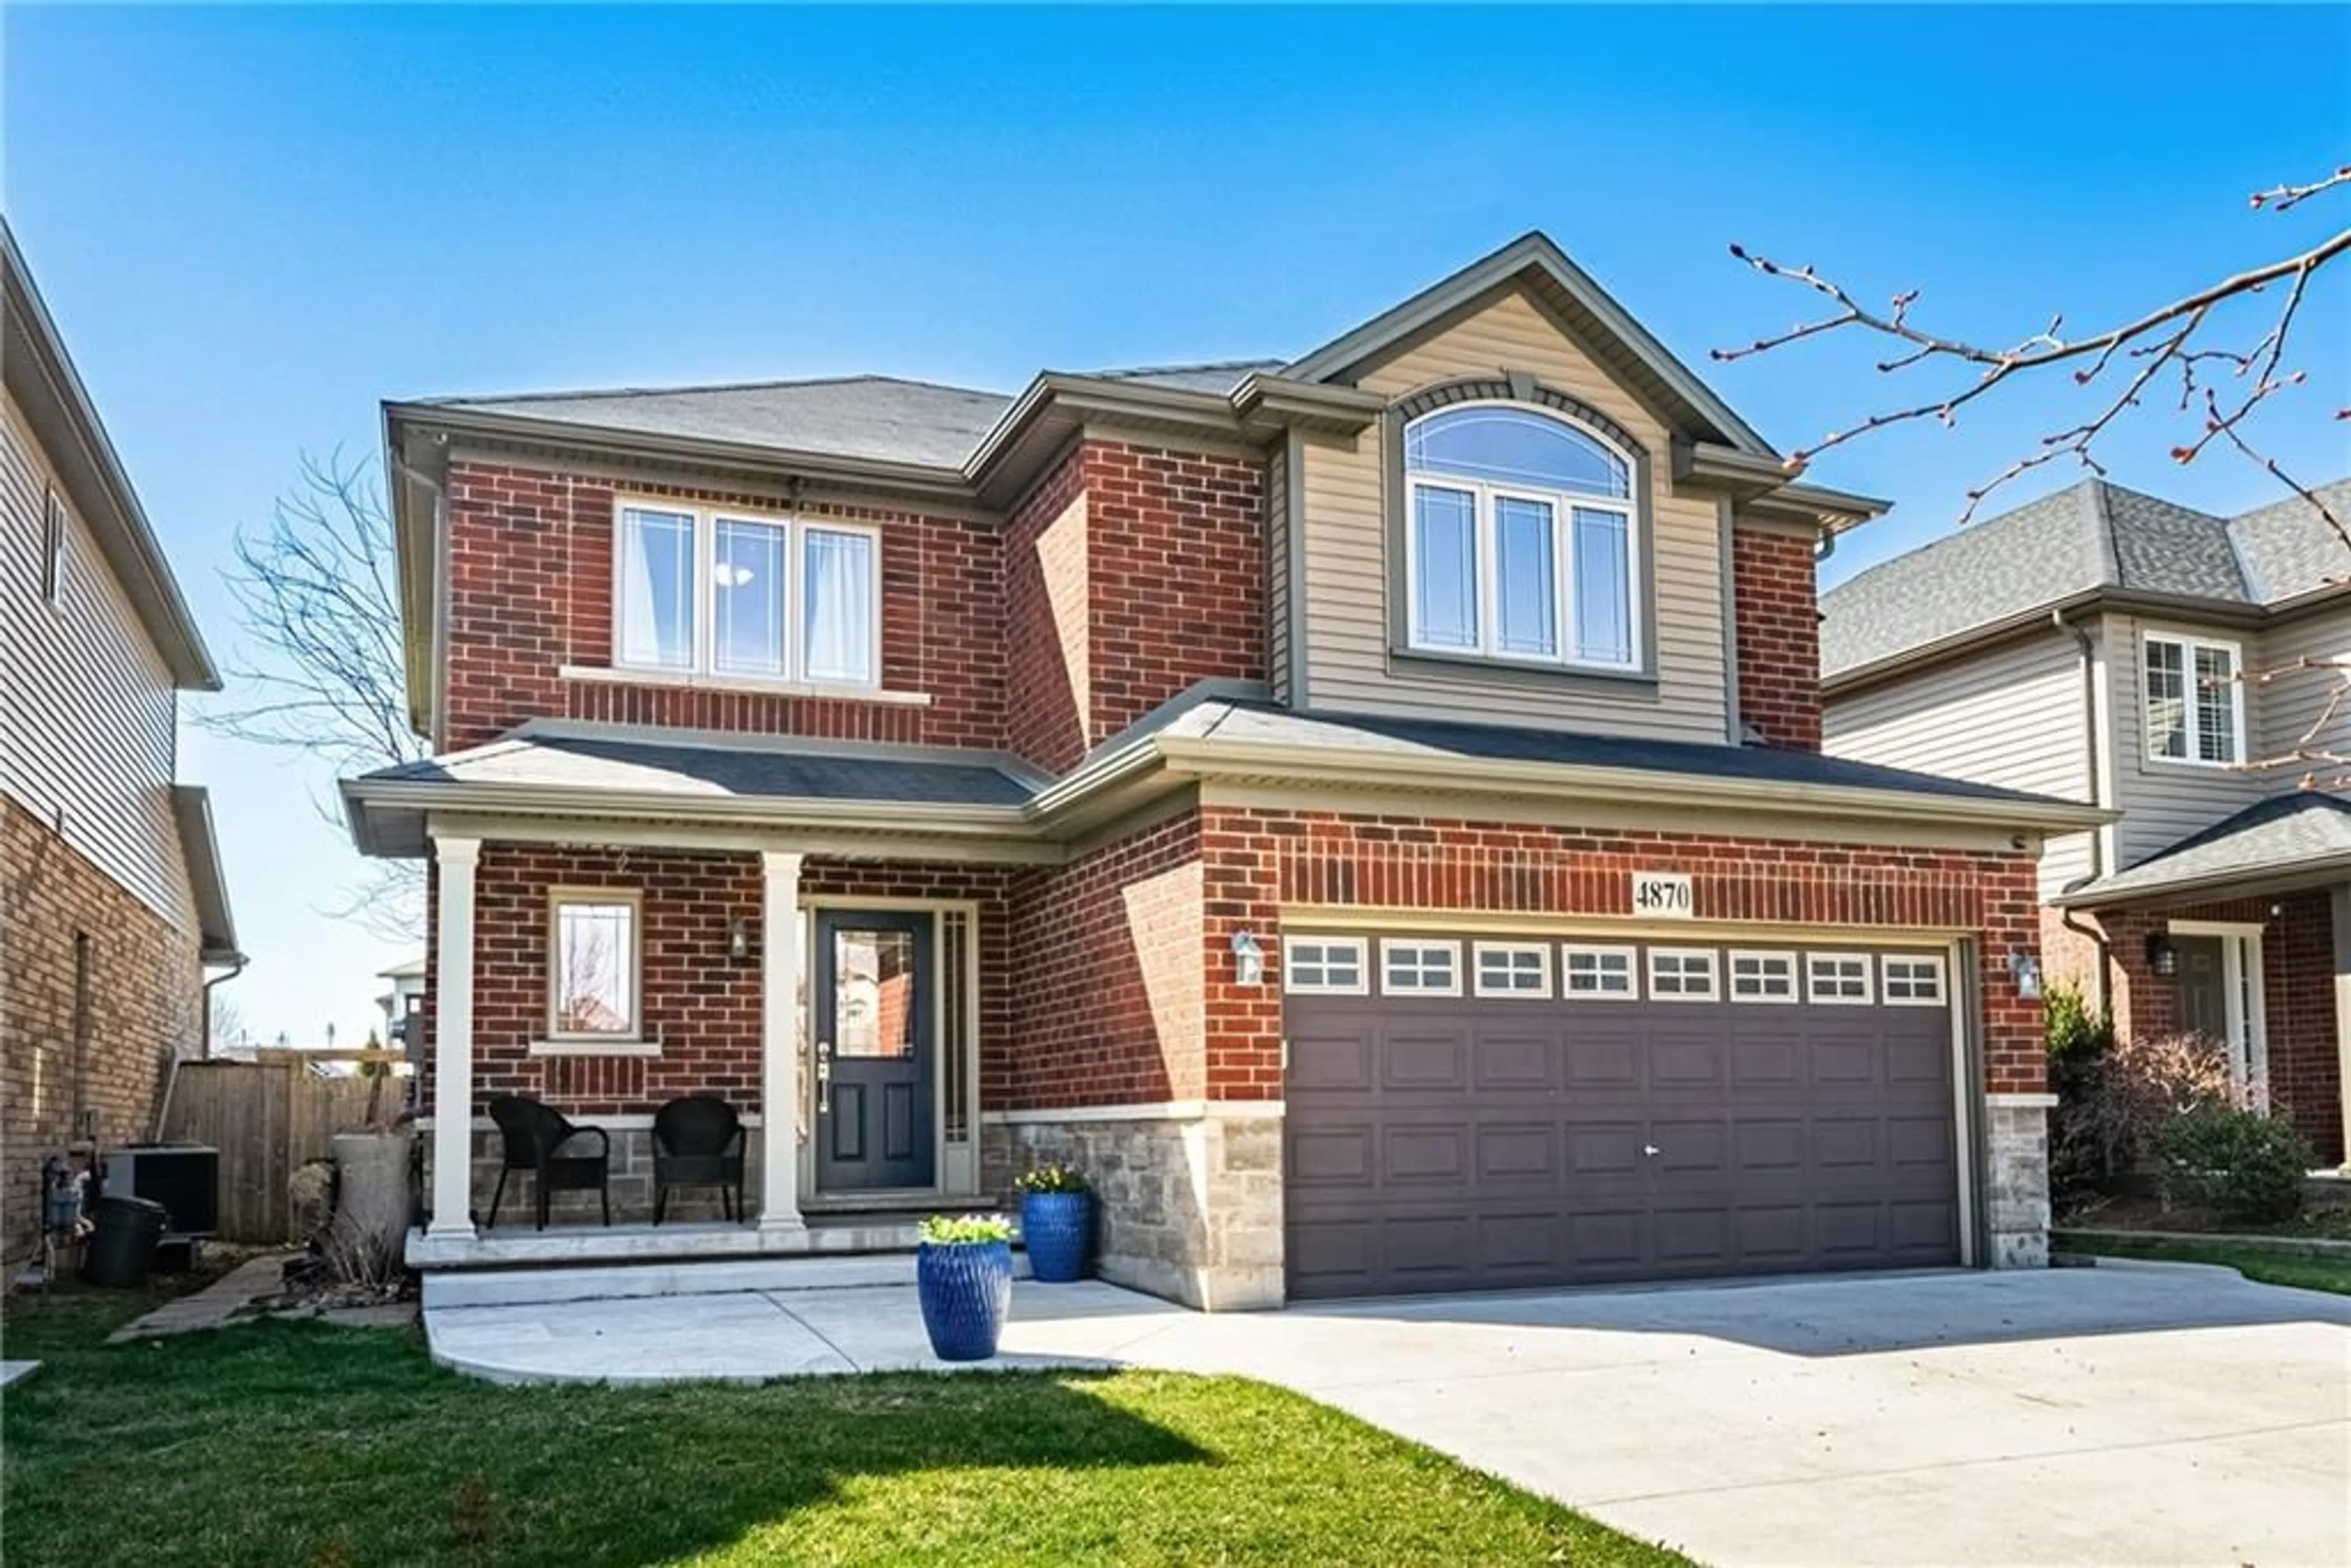 Home with brick exterior material for 4870 ALLAN Crt, Beamsville Ontario L0R 1B3